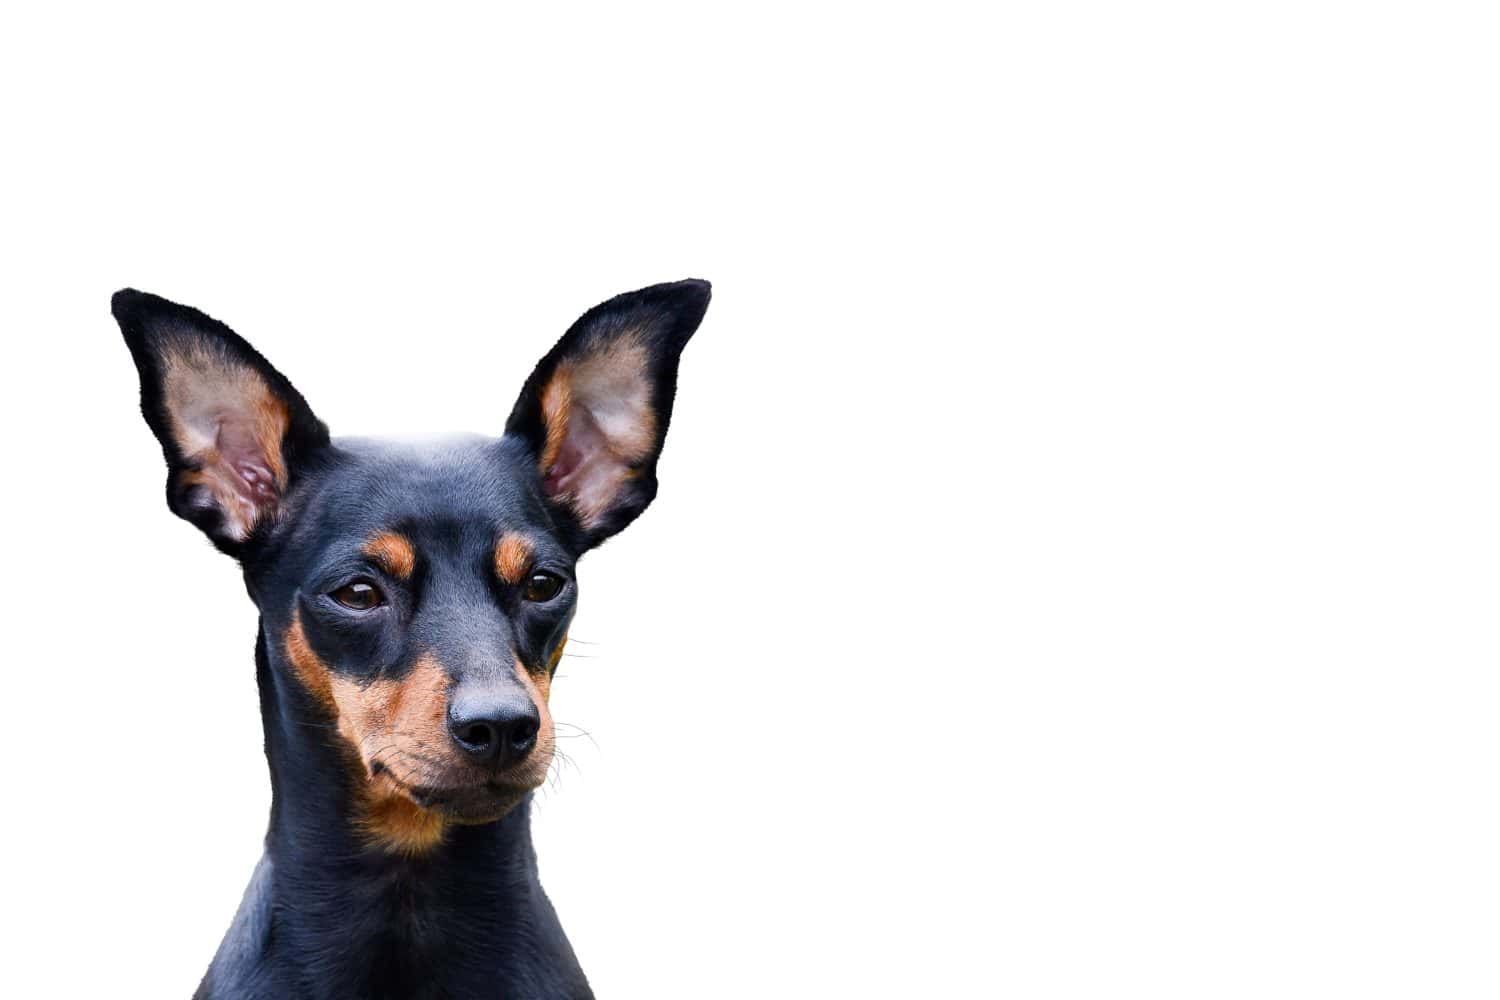 A Miniature Pinscher isolated on a white background